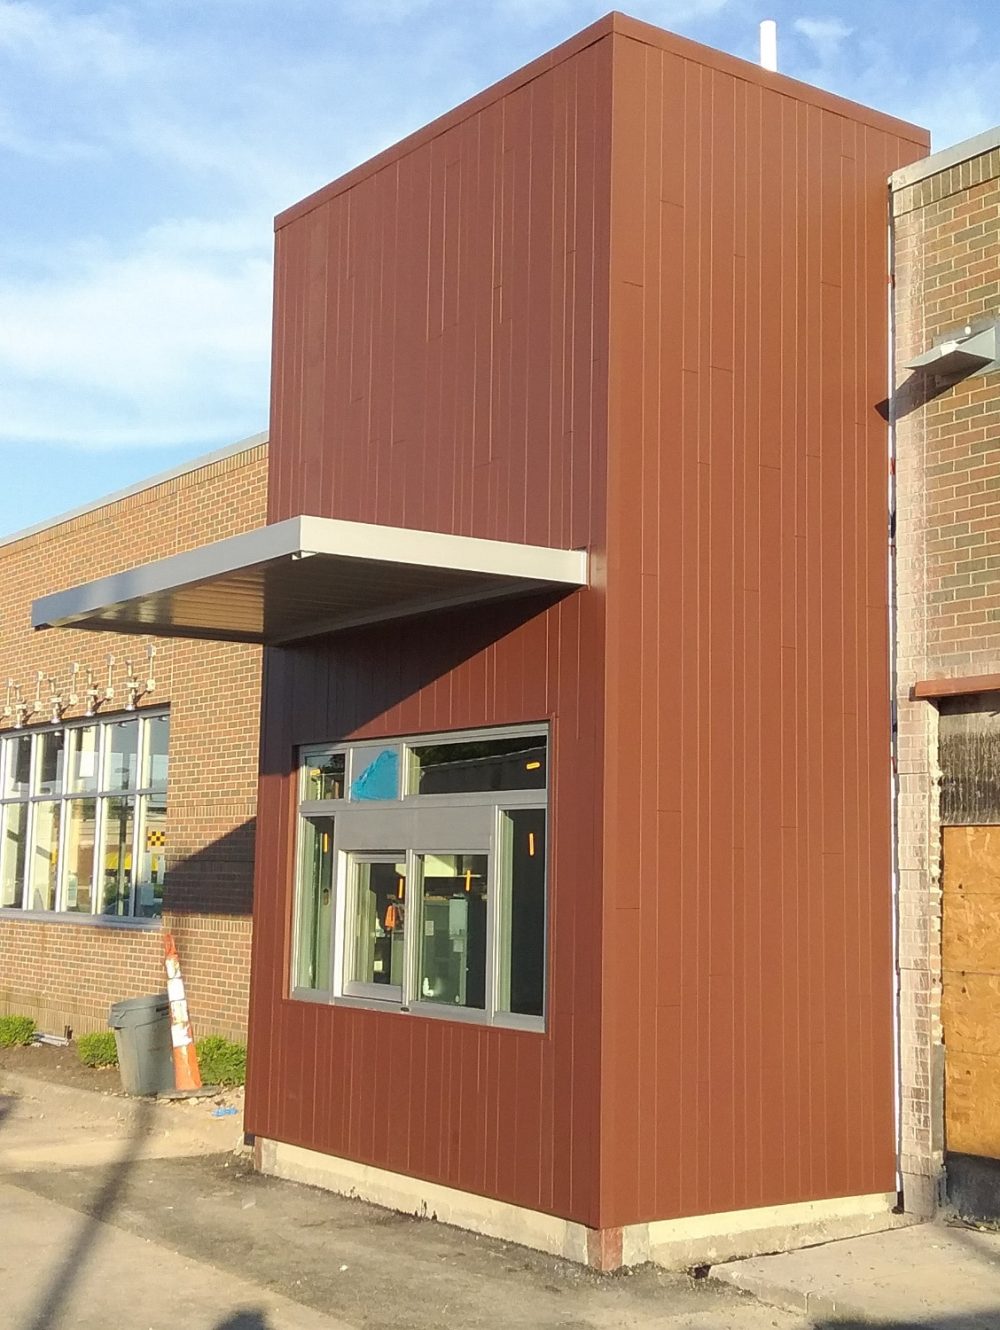 Chipolte | Extruded Panel Systems (EPS)